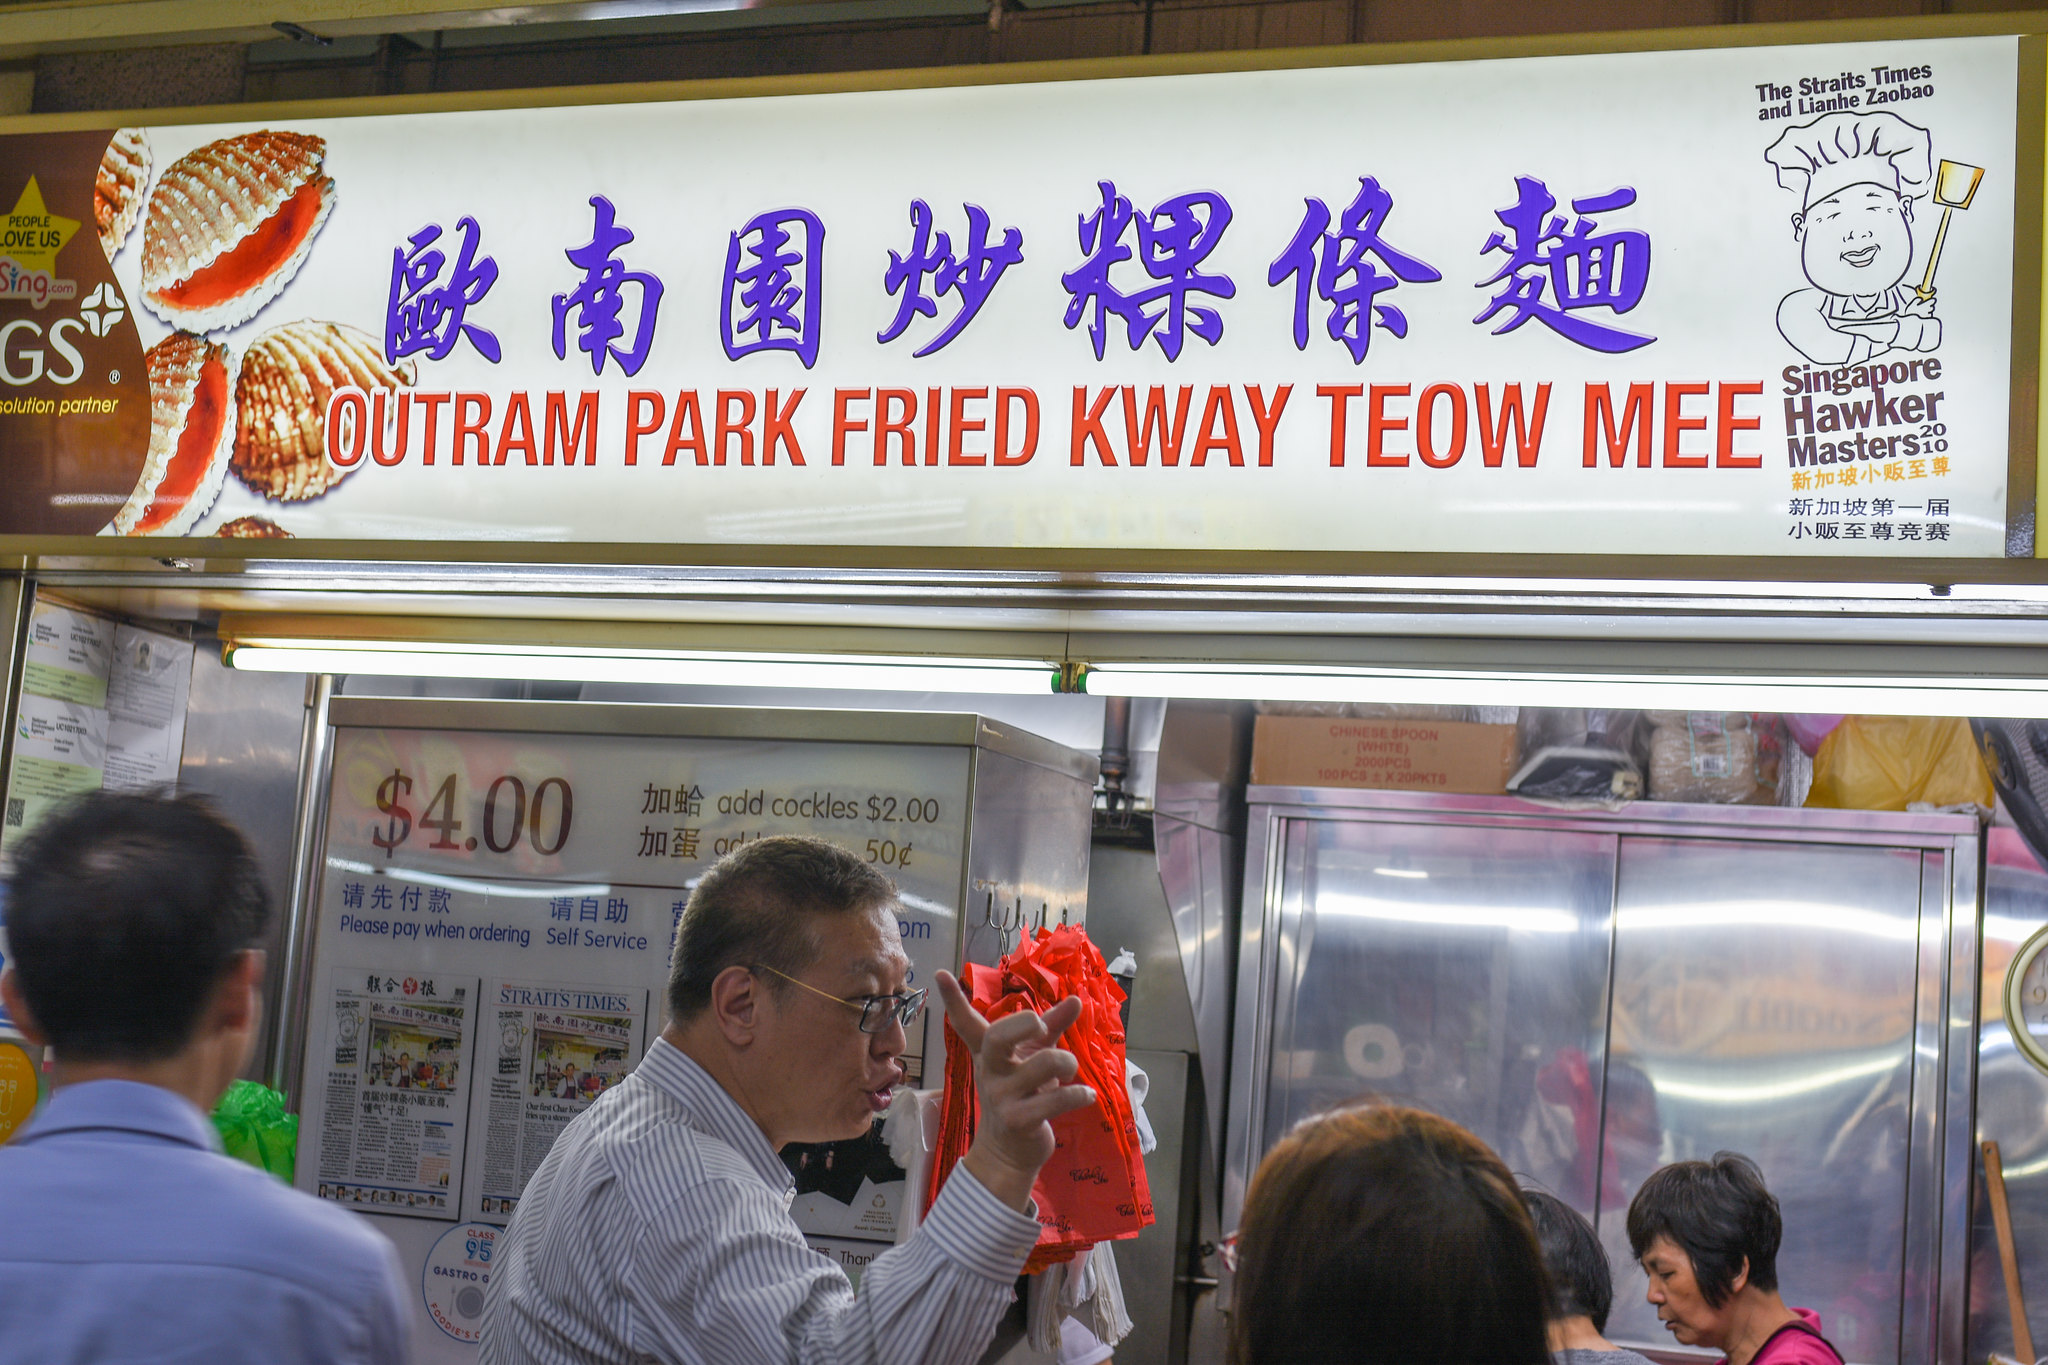 Outram Park Fried Kway Teow Mee DSC_6429-1